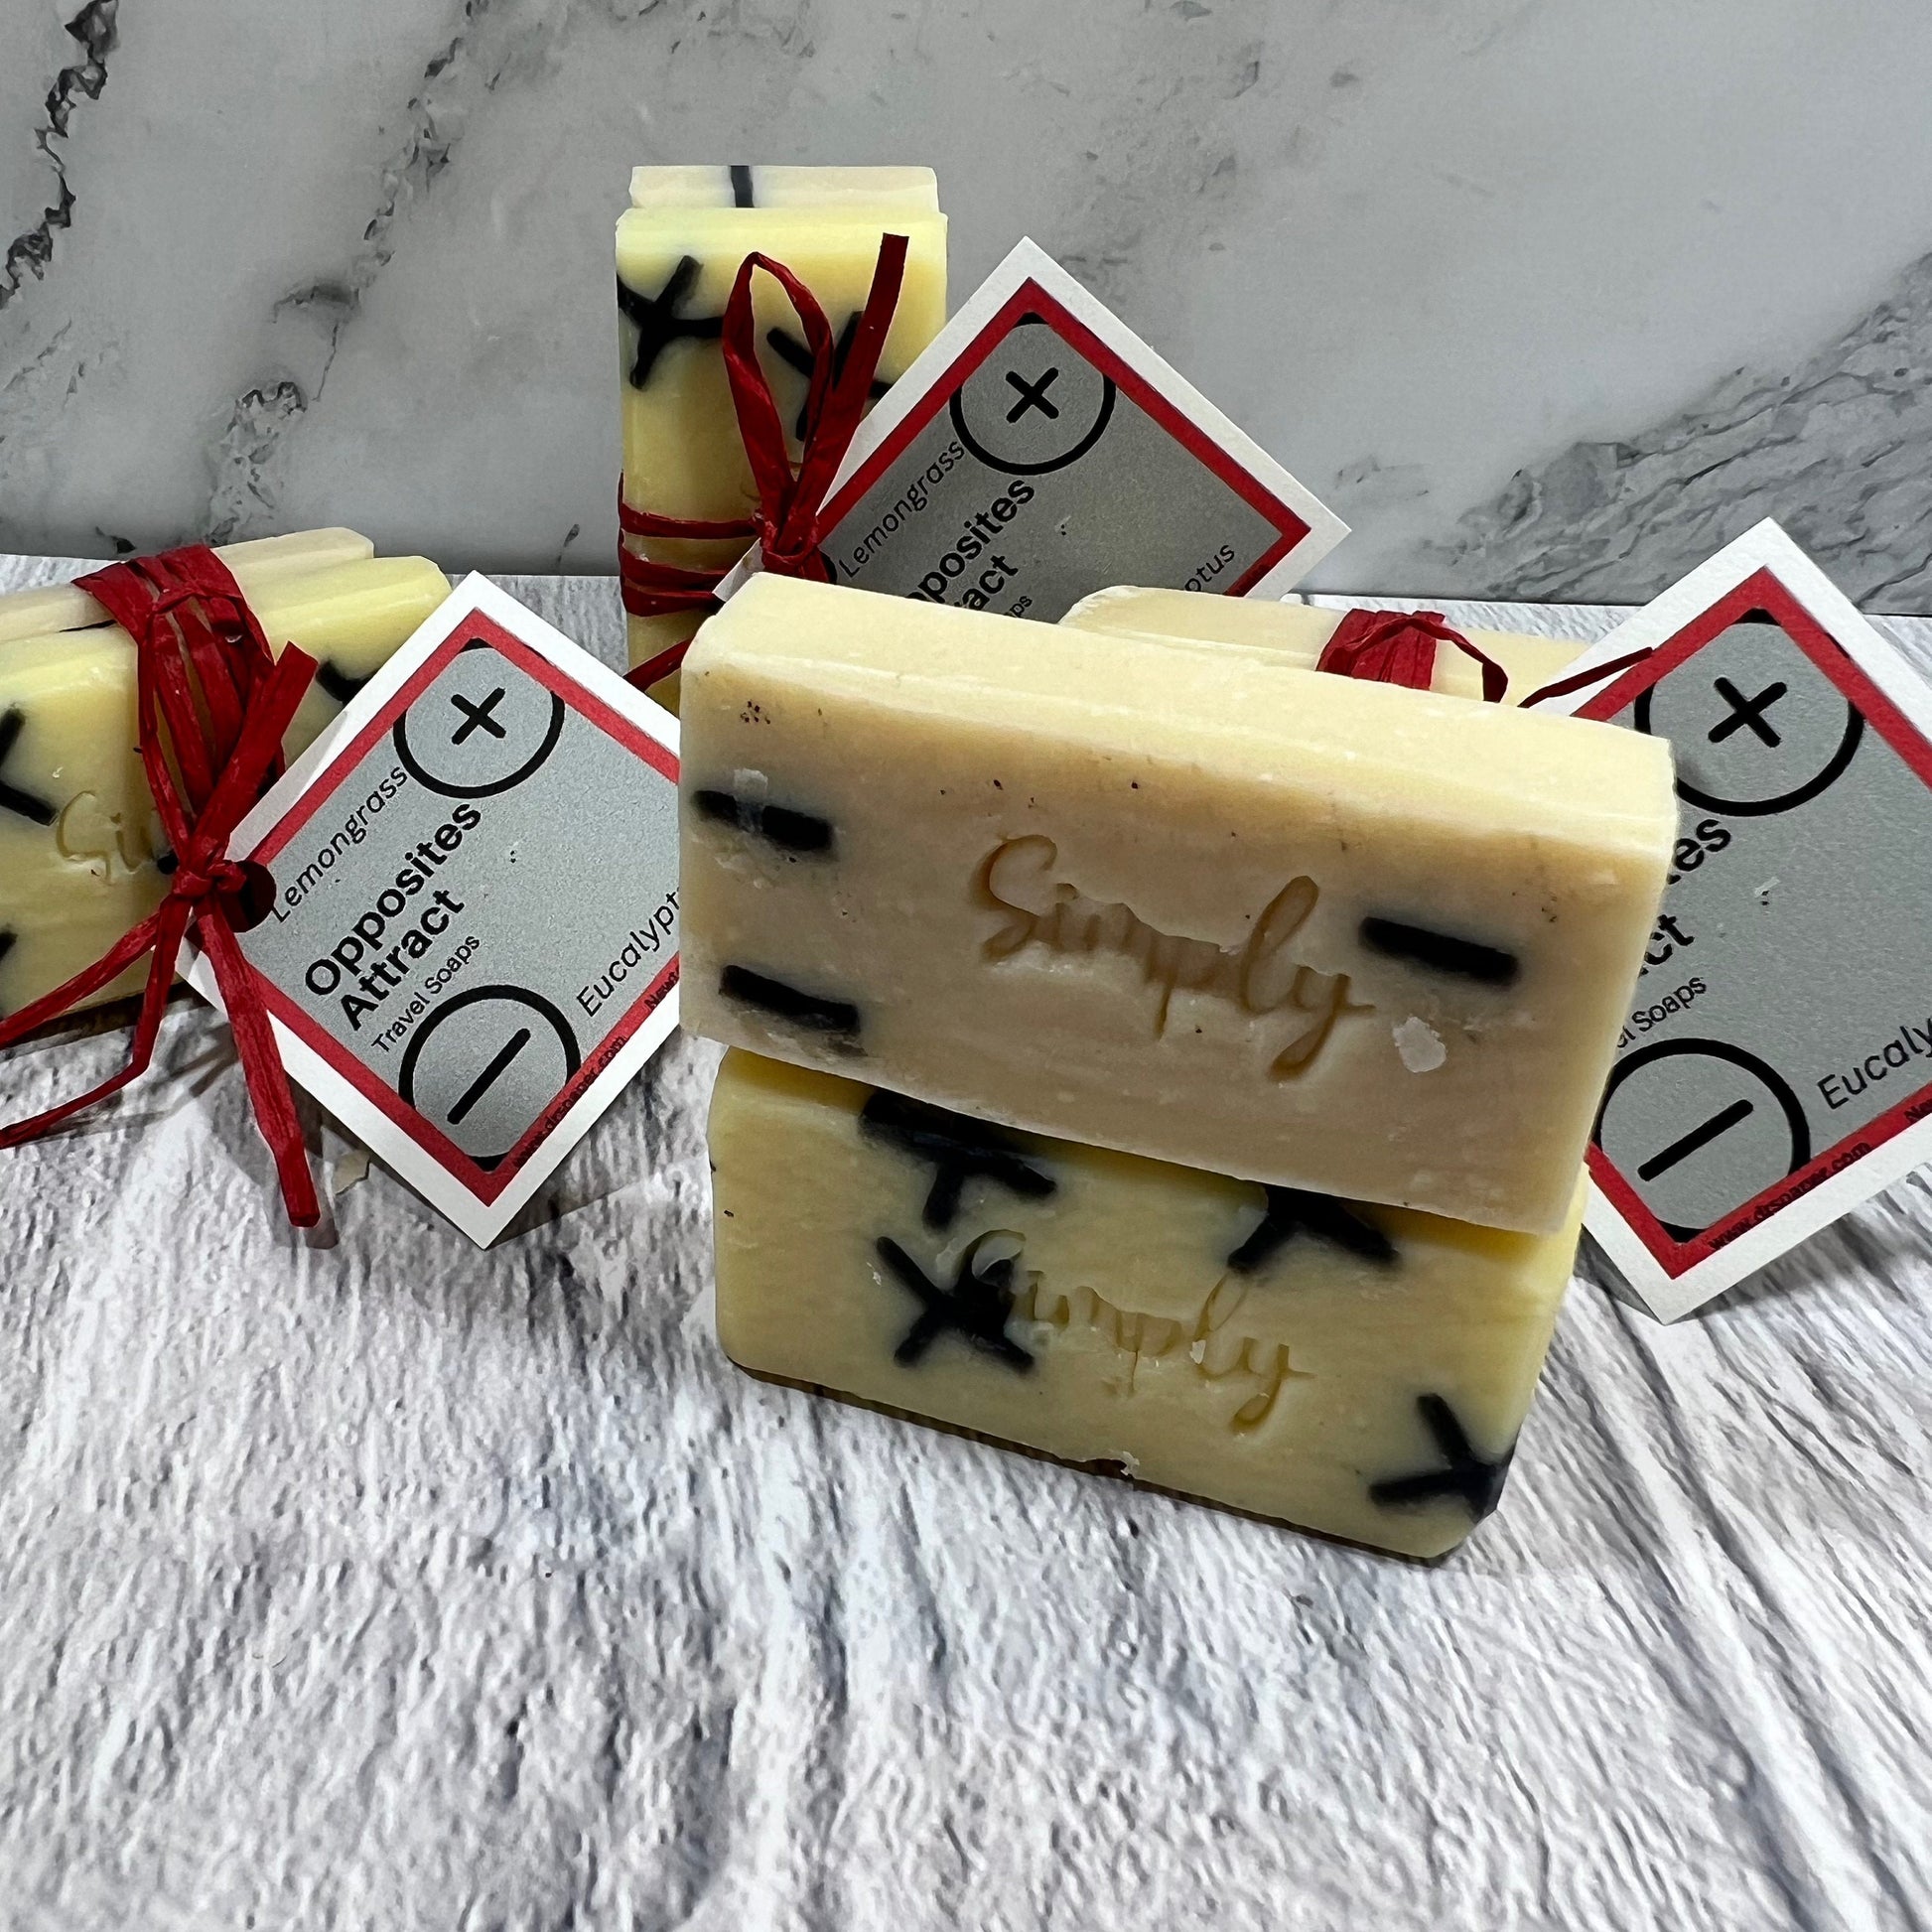 Opposites Attract Travel / Guest Soap Set of 2 in Eucalyptus and Lemongrass